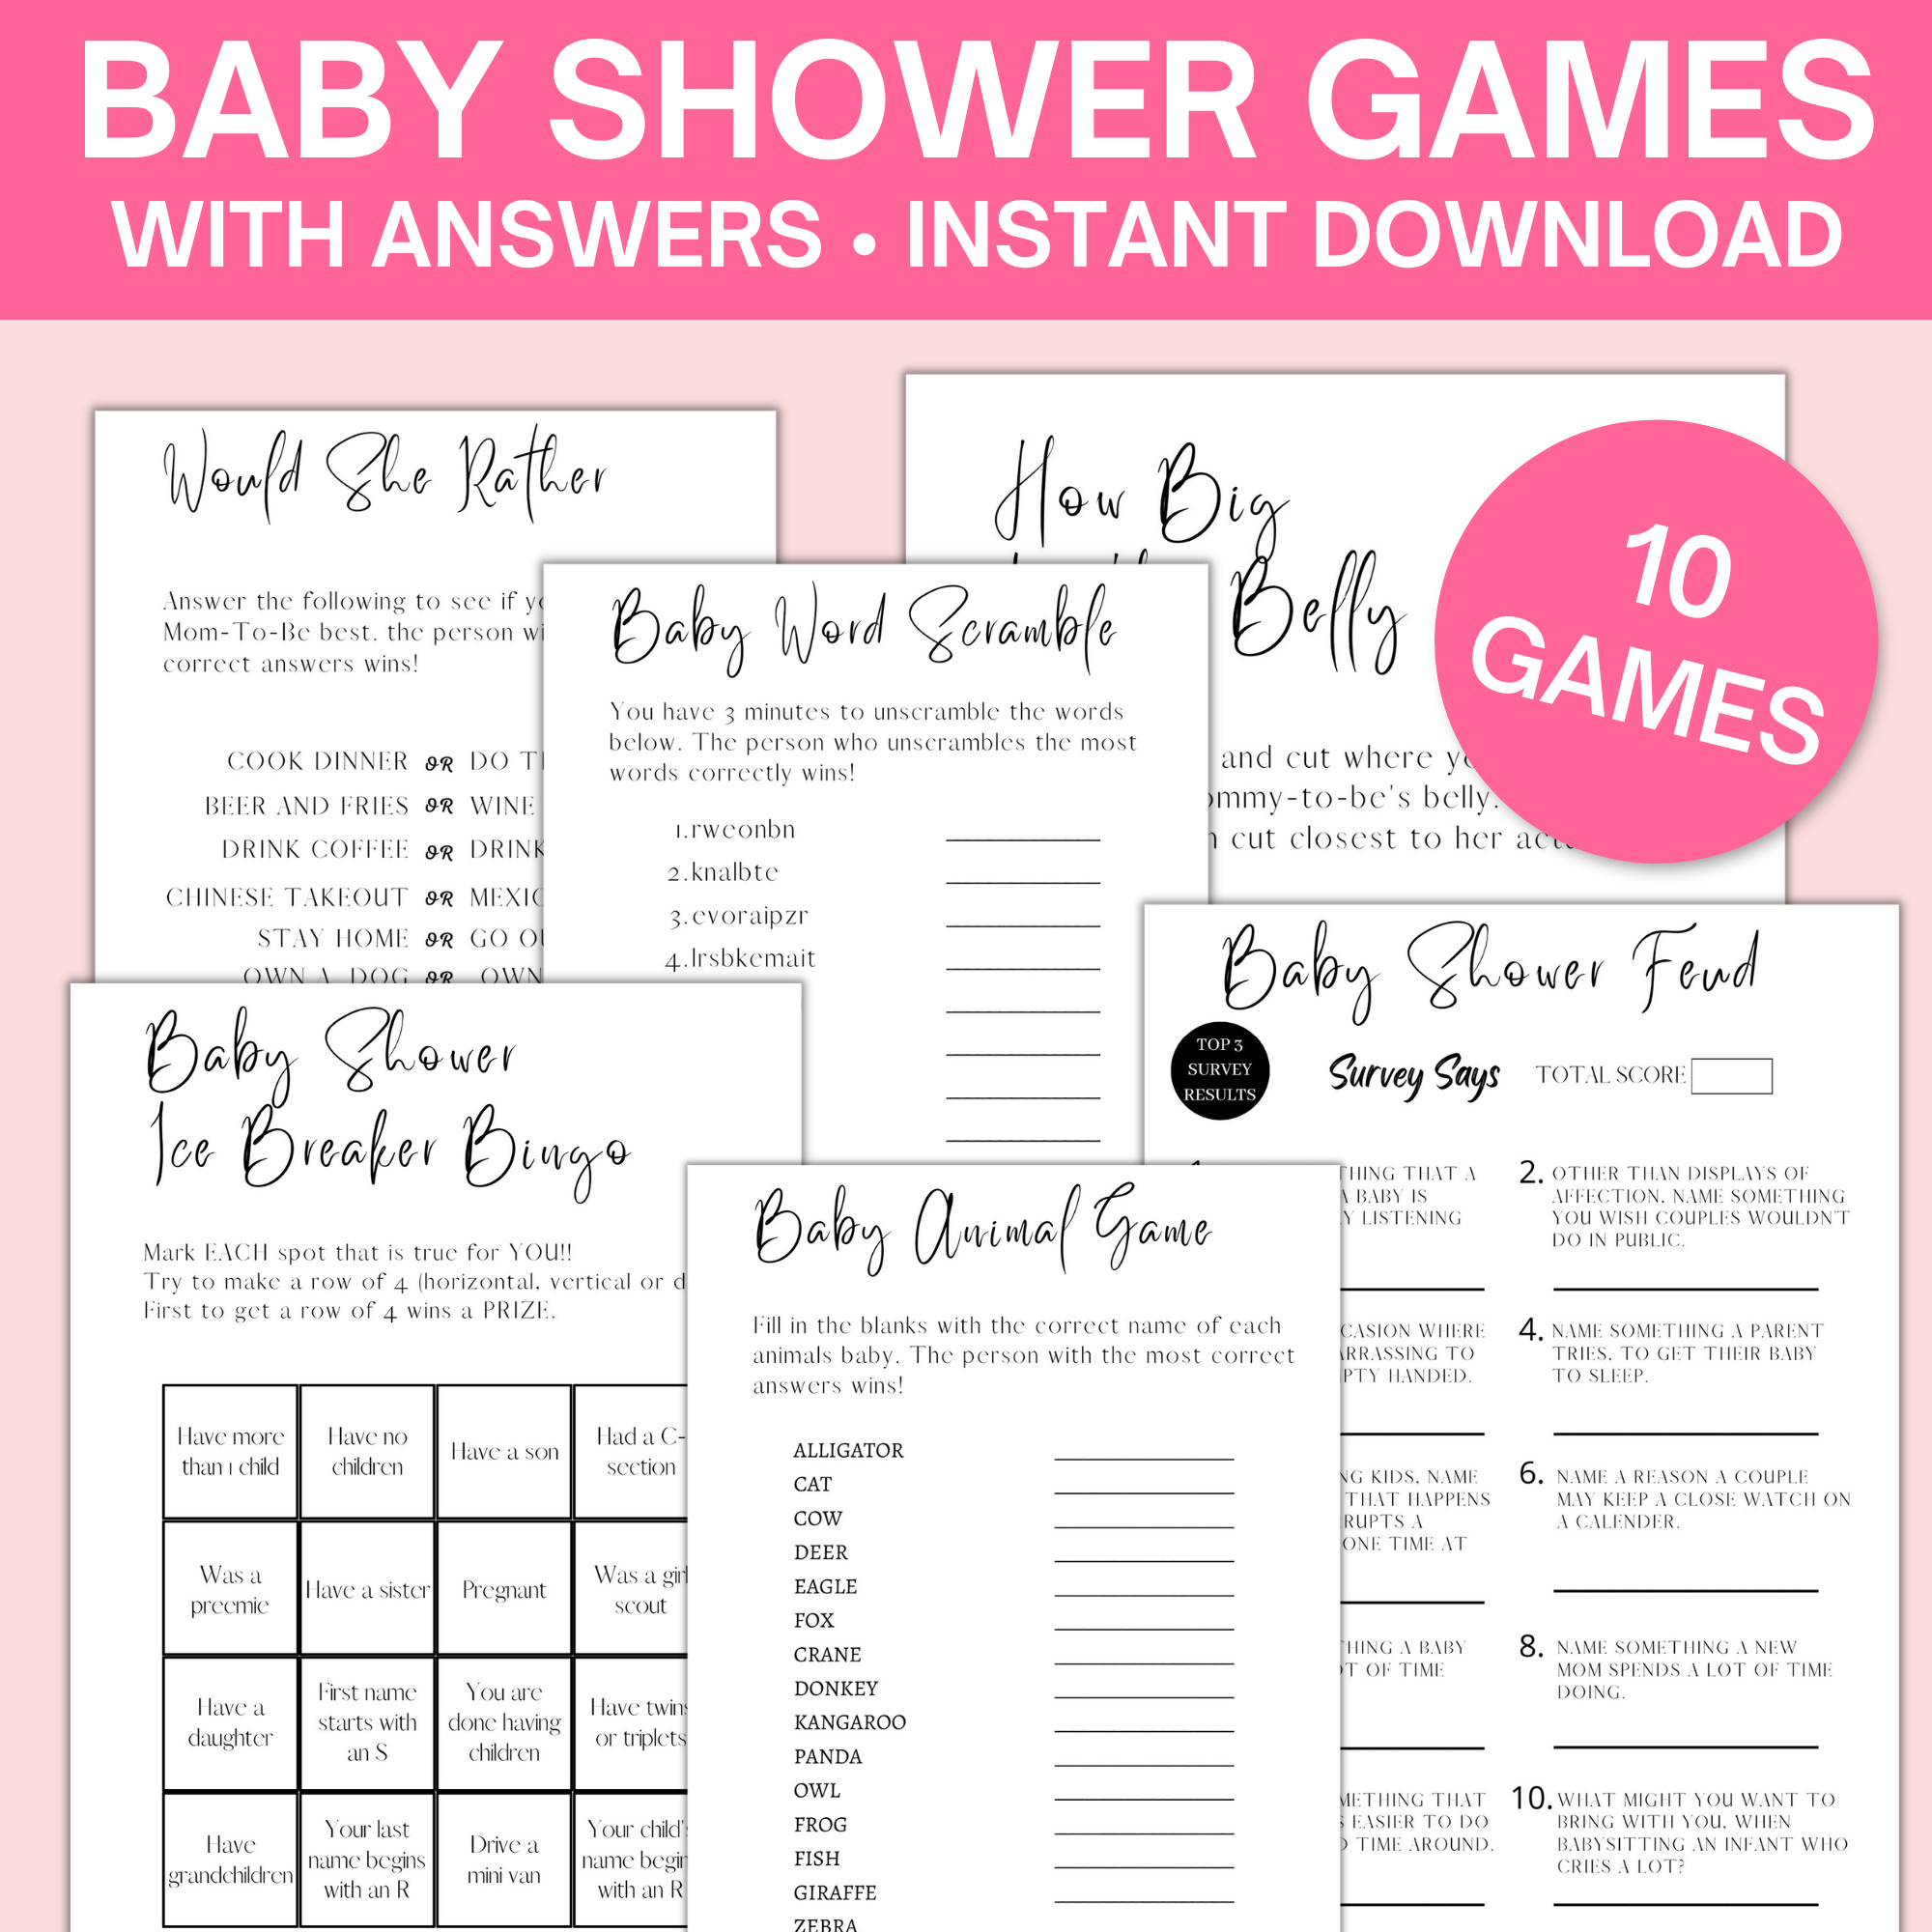 Free Printable Baby Shower Games - Volume 3, Instant Download